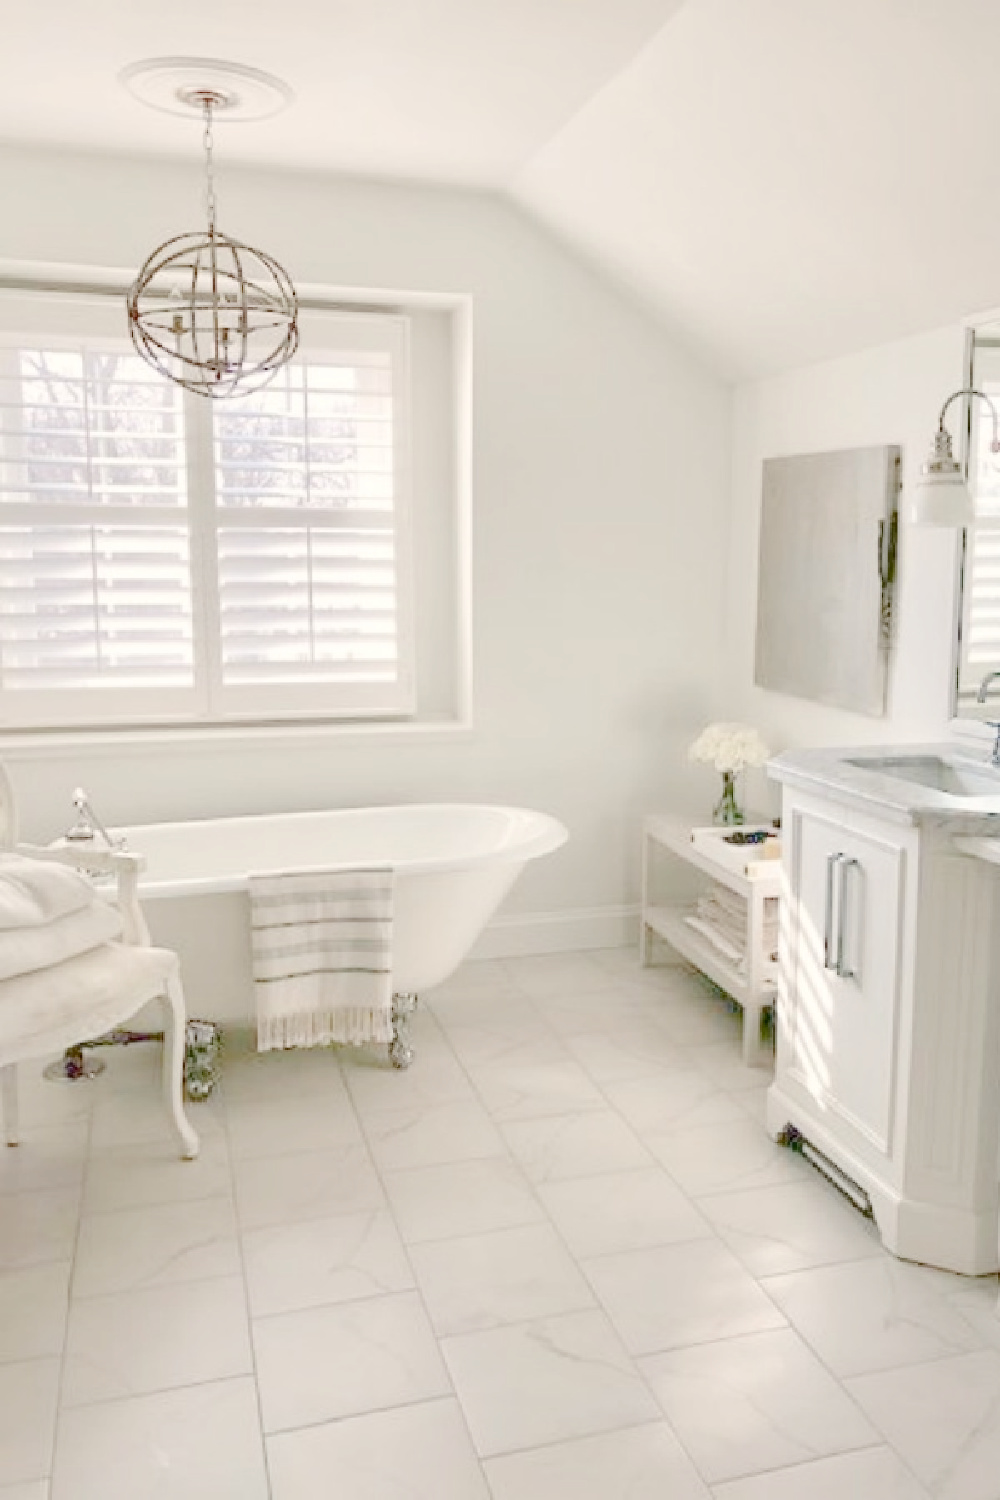 BM OC-151 in our renovated bath with modern vintage style - Hello Lovely Studio. #bmbrilliantwhite #bmoc151 #brightwhitepaintcolors